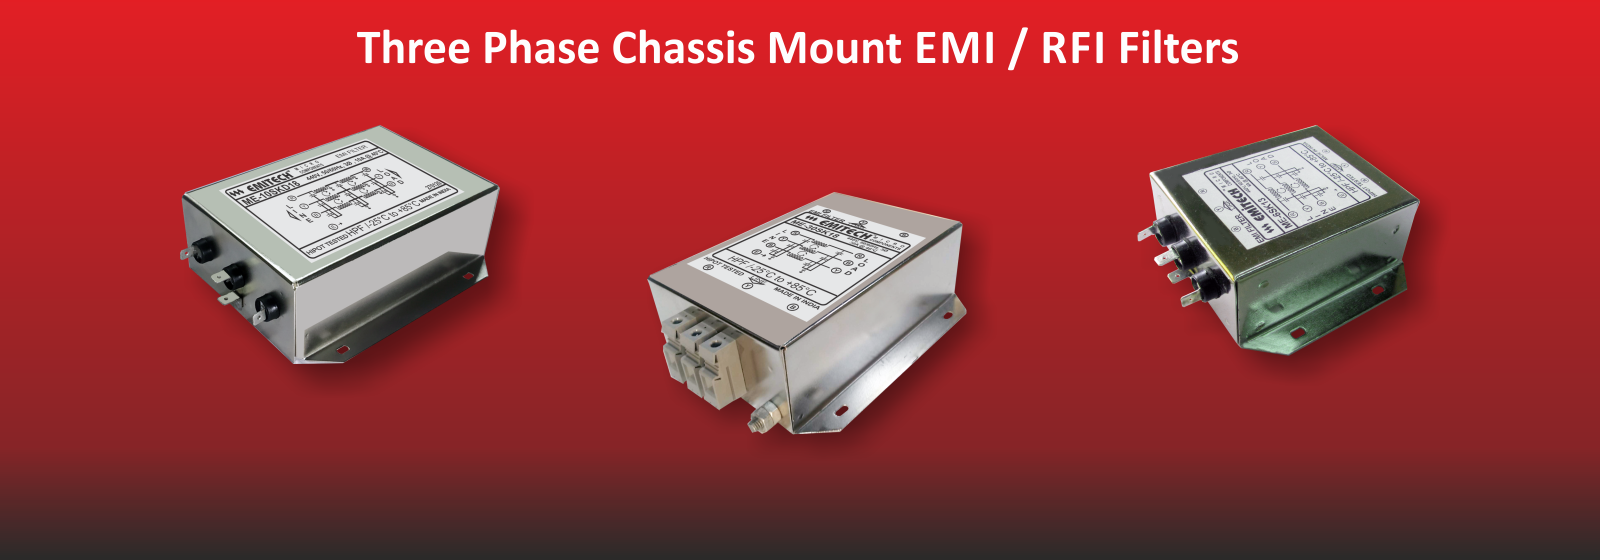 Three Phase Chassis Mount EMI Filter